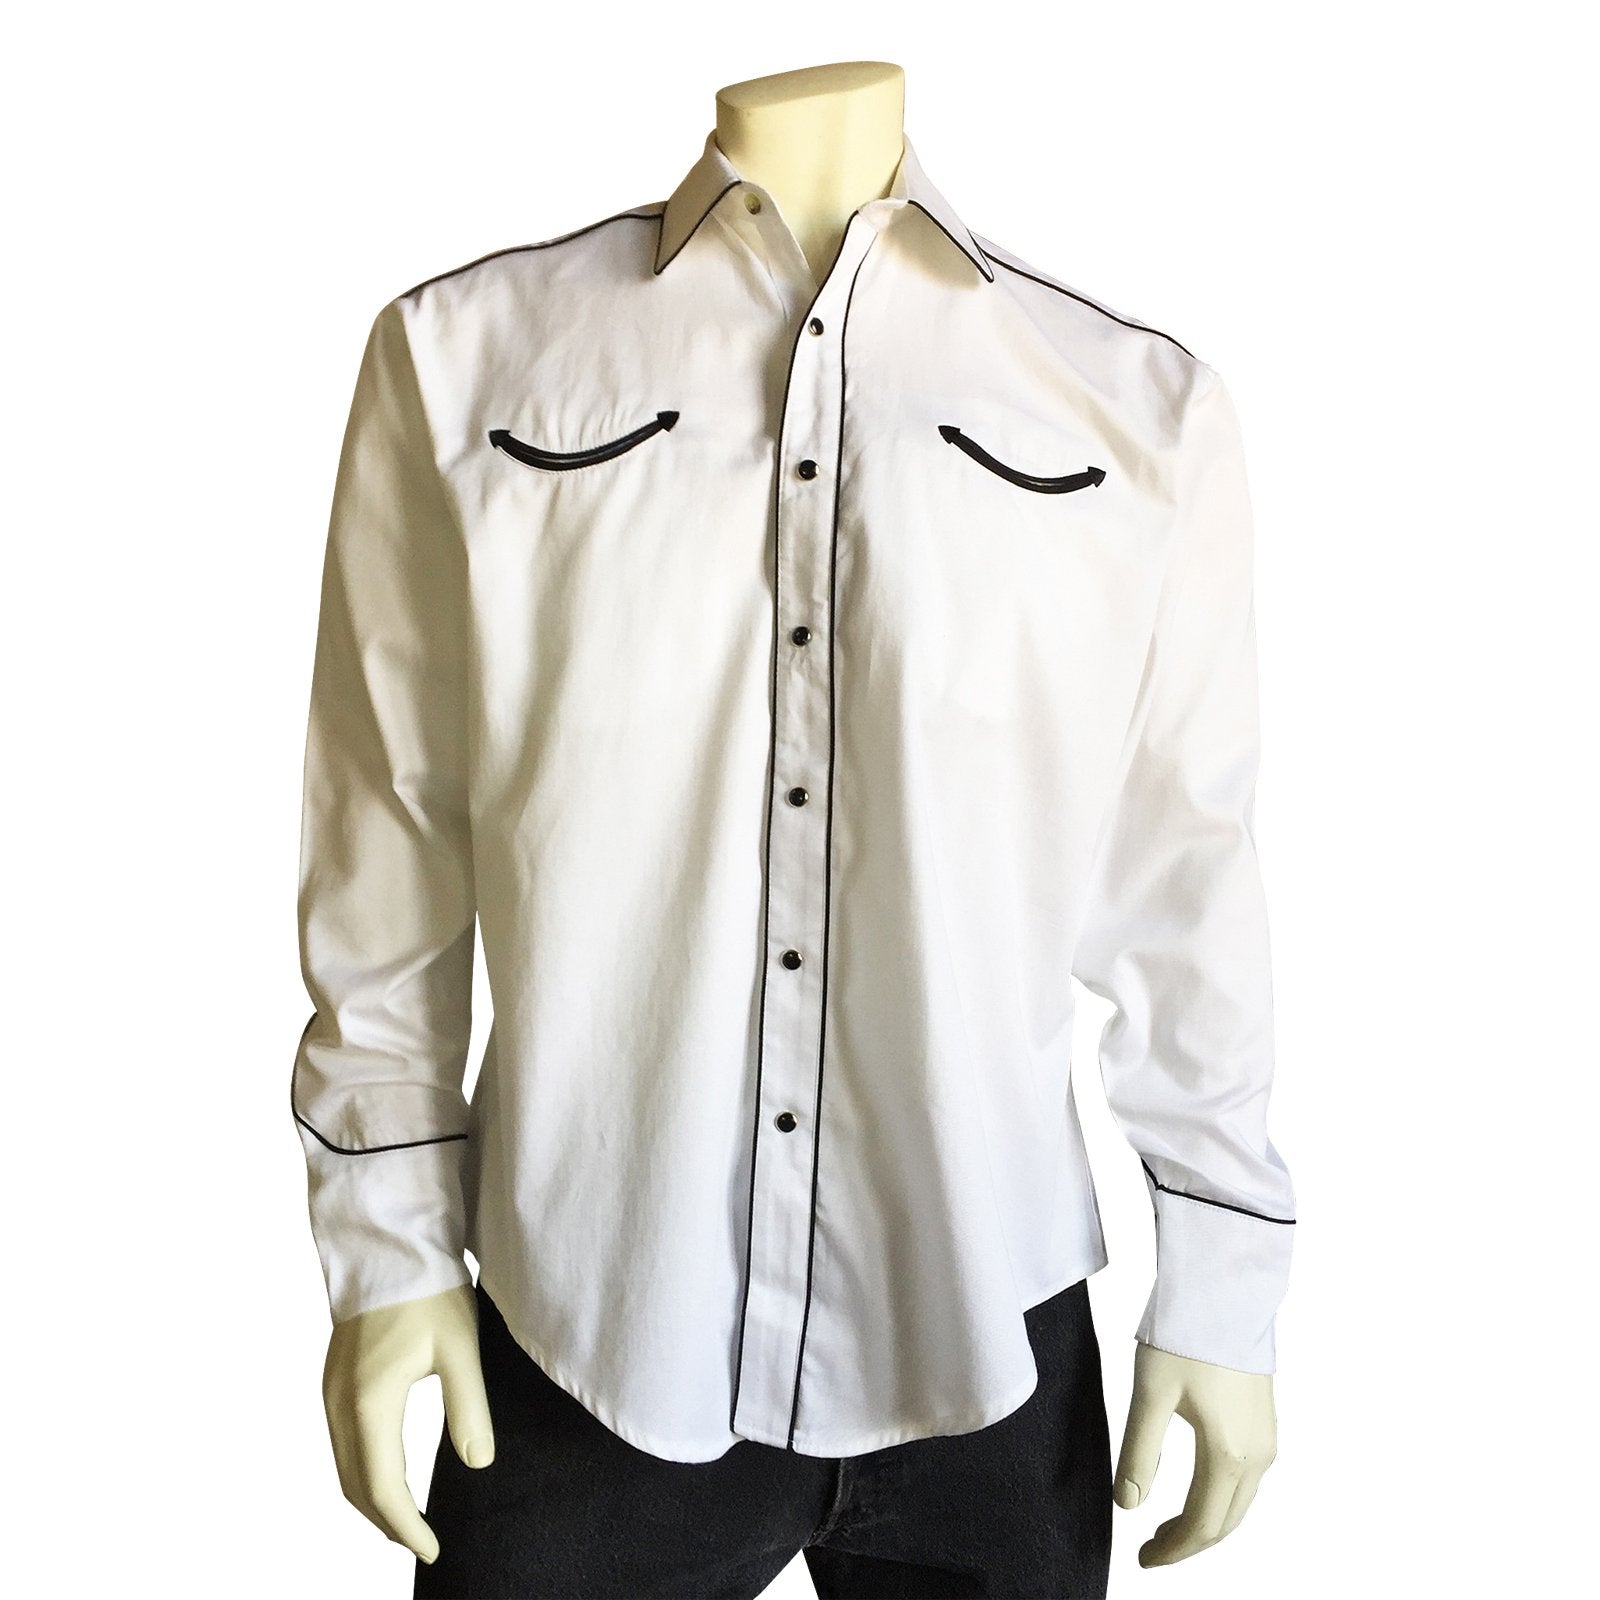 Rockmount Ranch Wear Men's Vintage Inspired Western Shirt White Black Piping Front #176799B